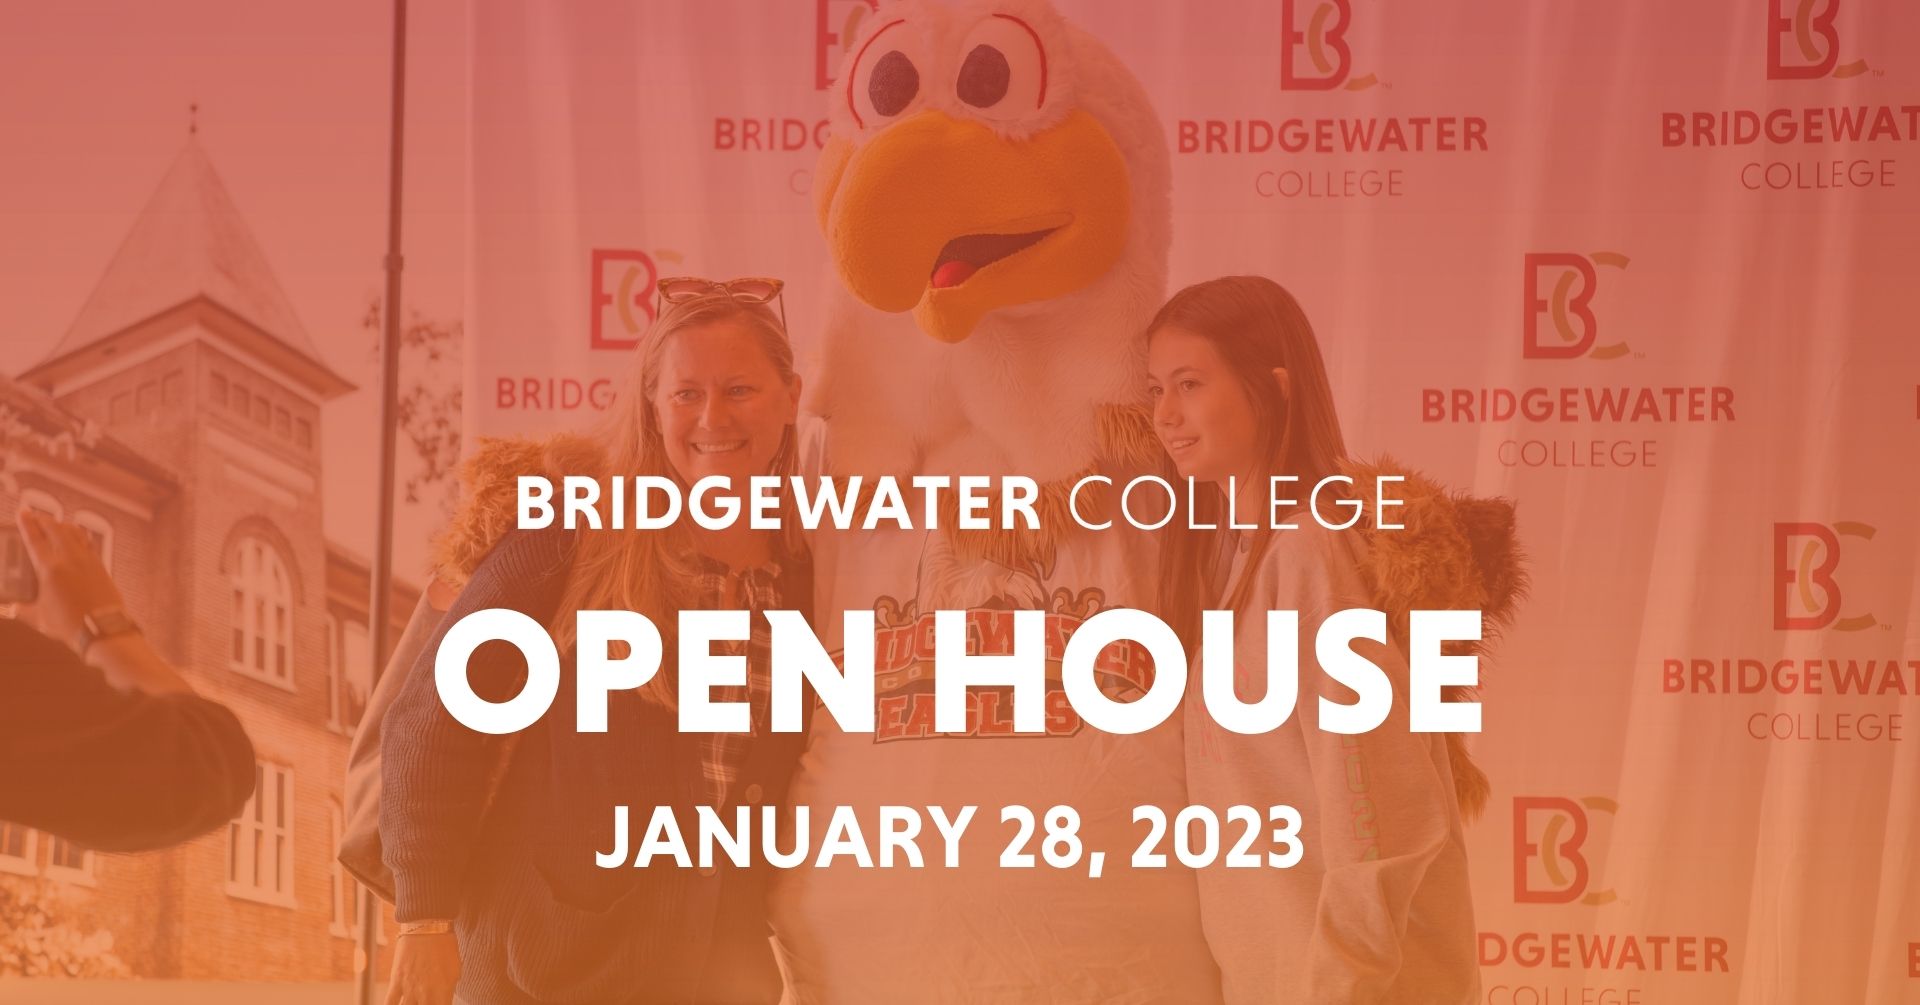 Family posing with mascot, Ernie at Open House with text overlay - Bridgewater College; Open House; January 28, 2023.